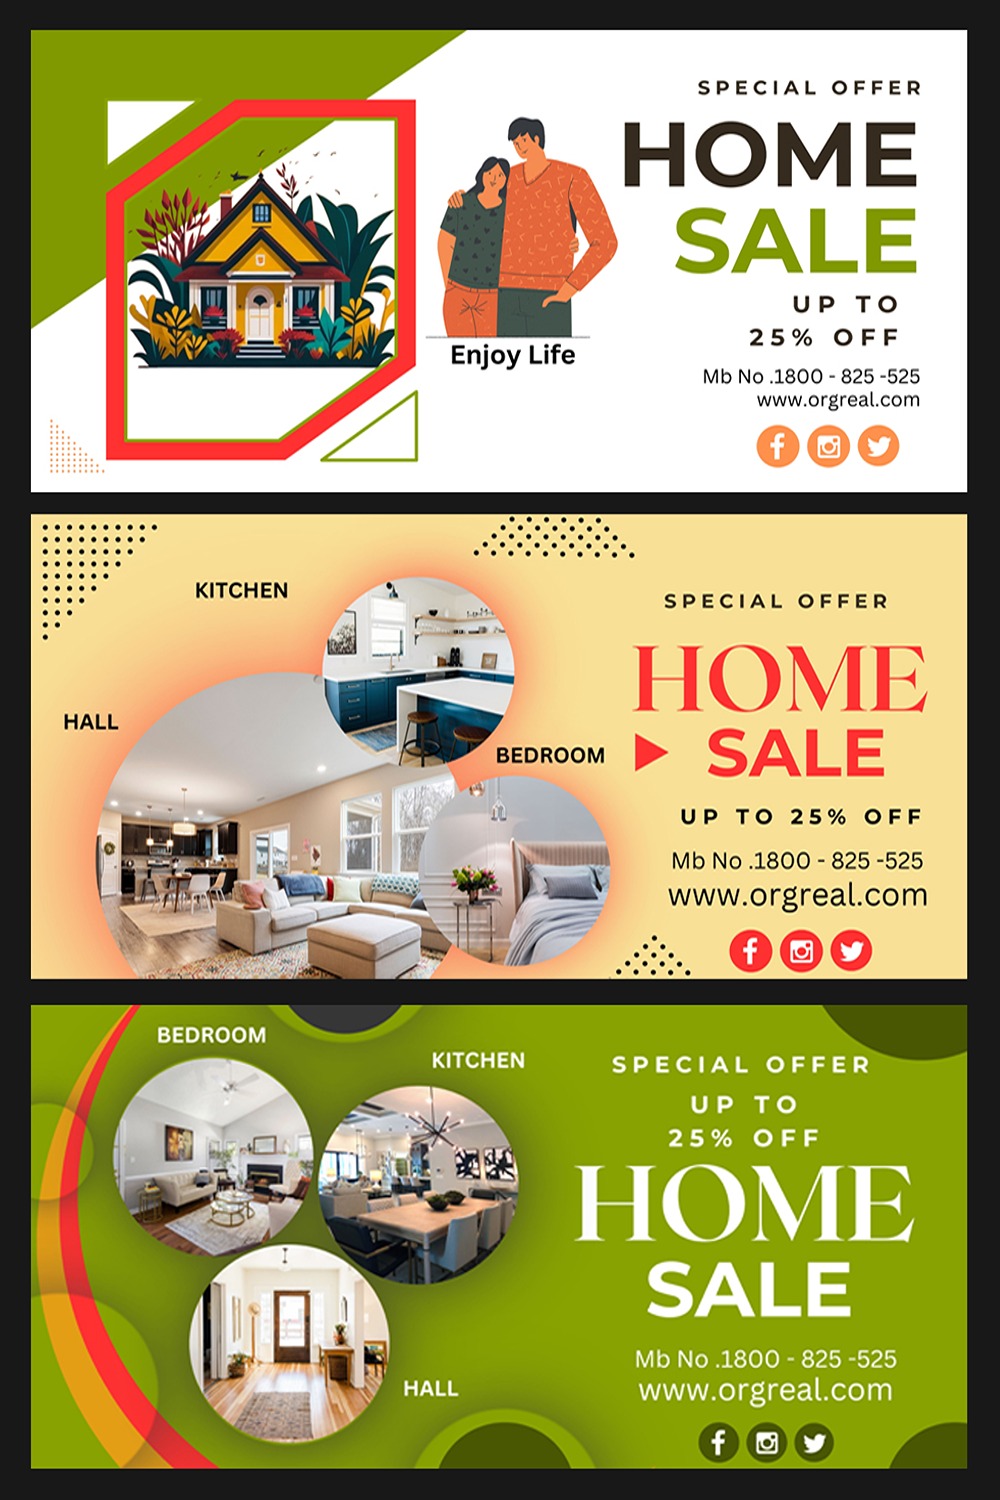 Home Sale - Banner & Poster Design Template Total = 03 pinterest preview image.